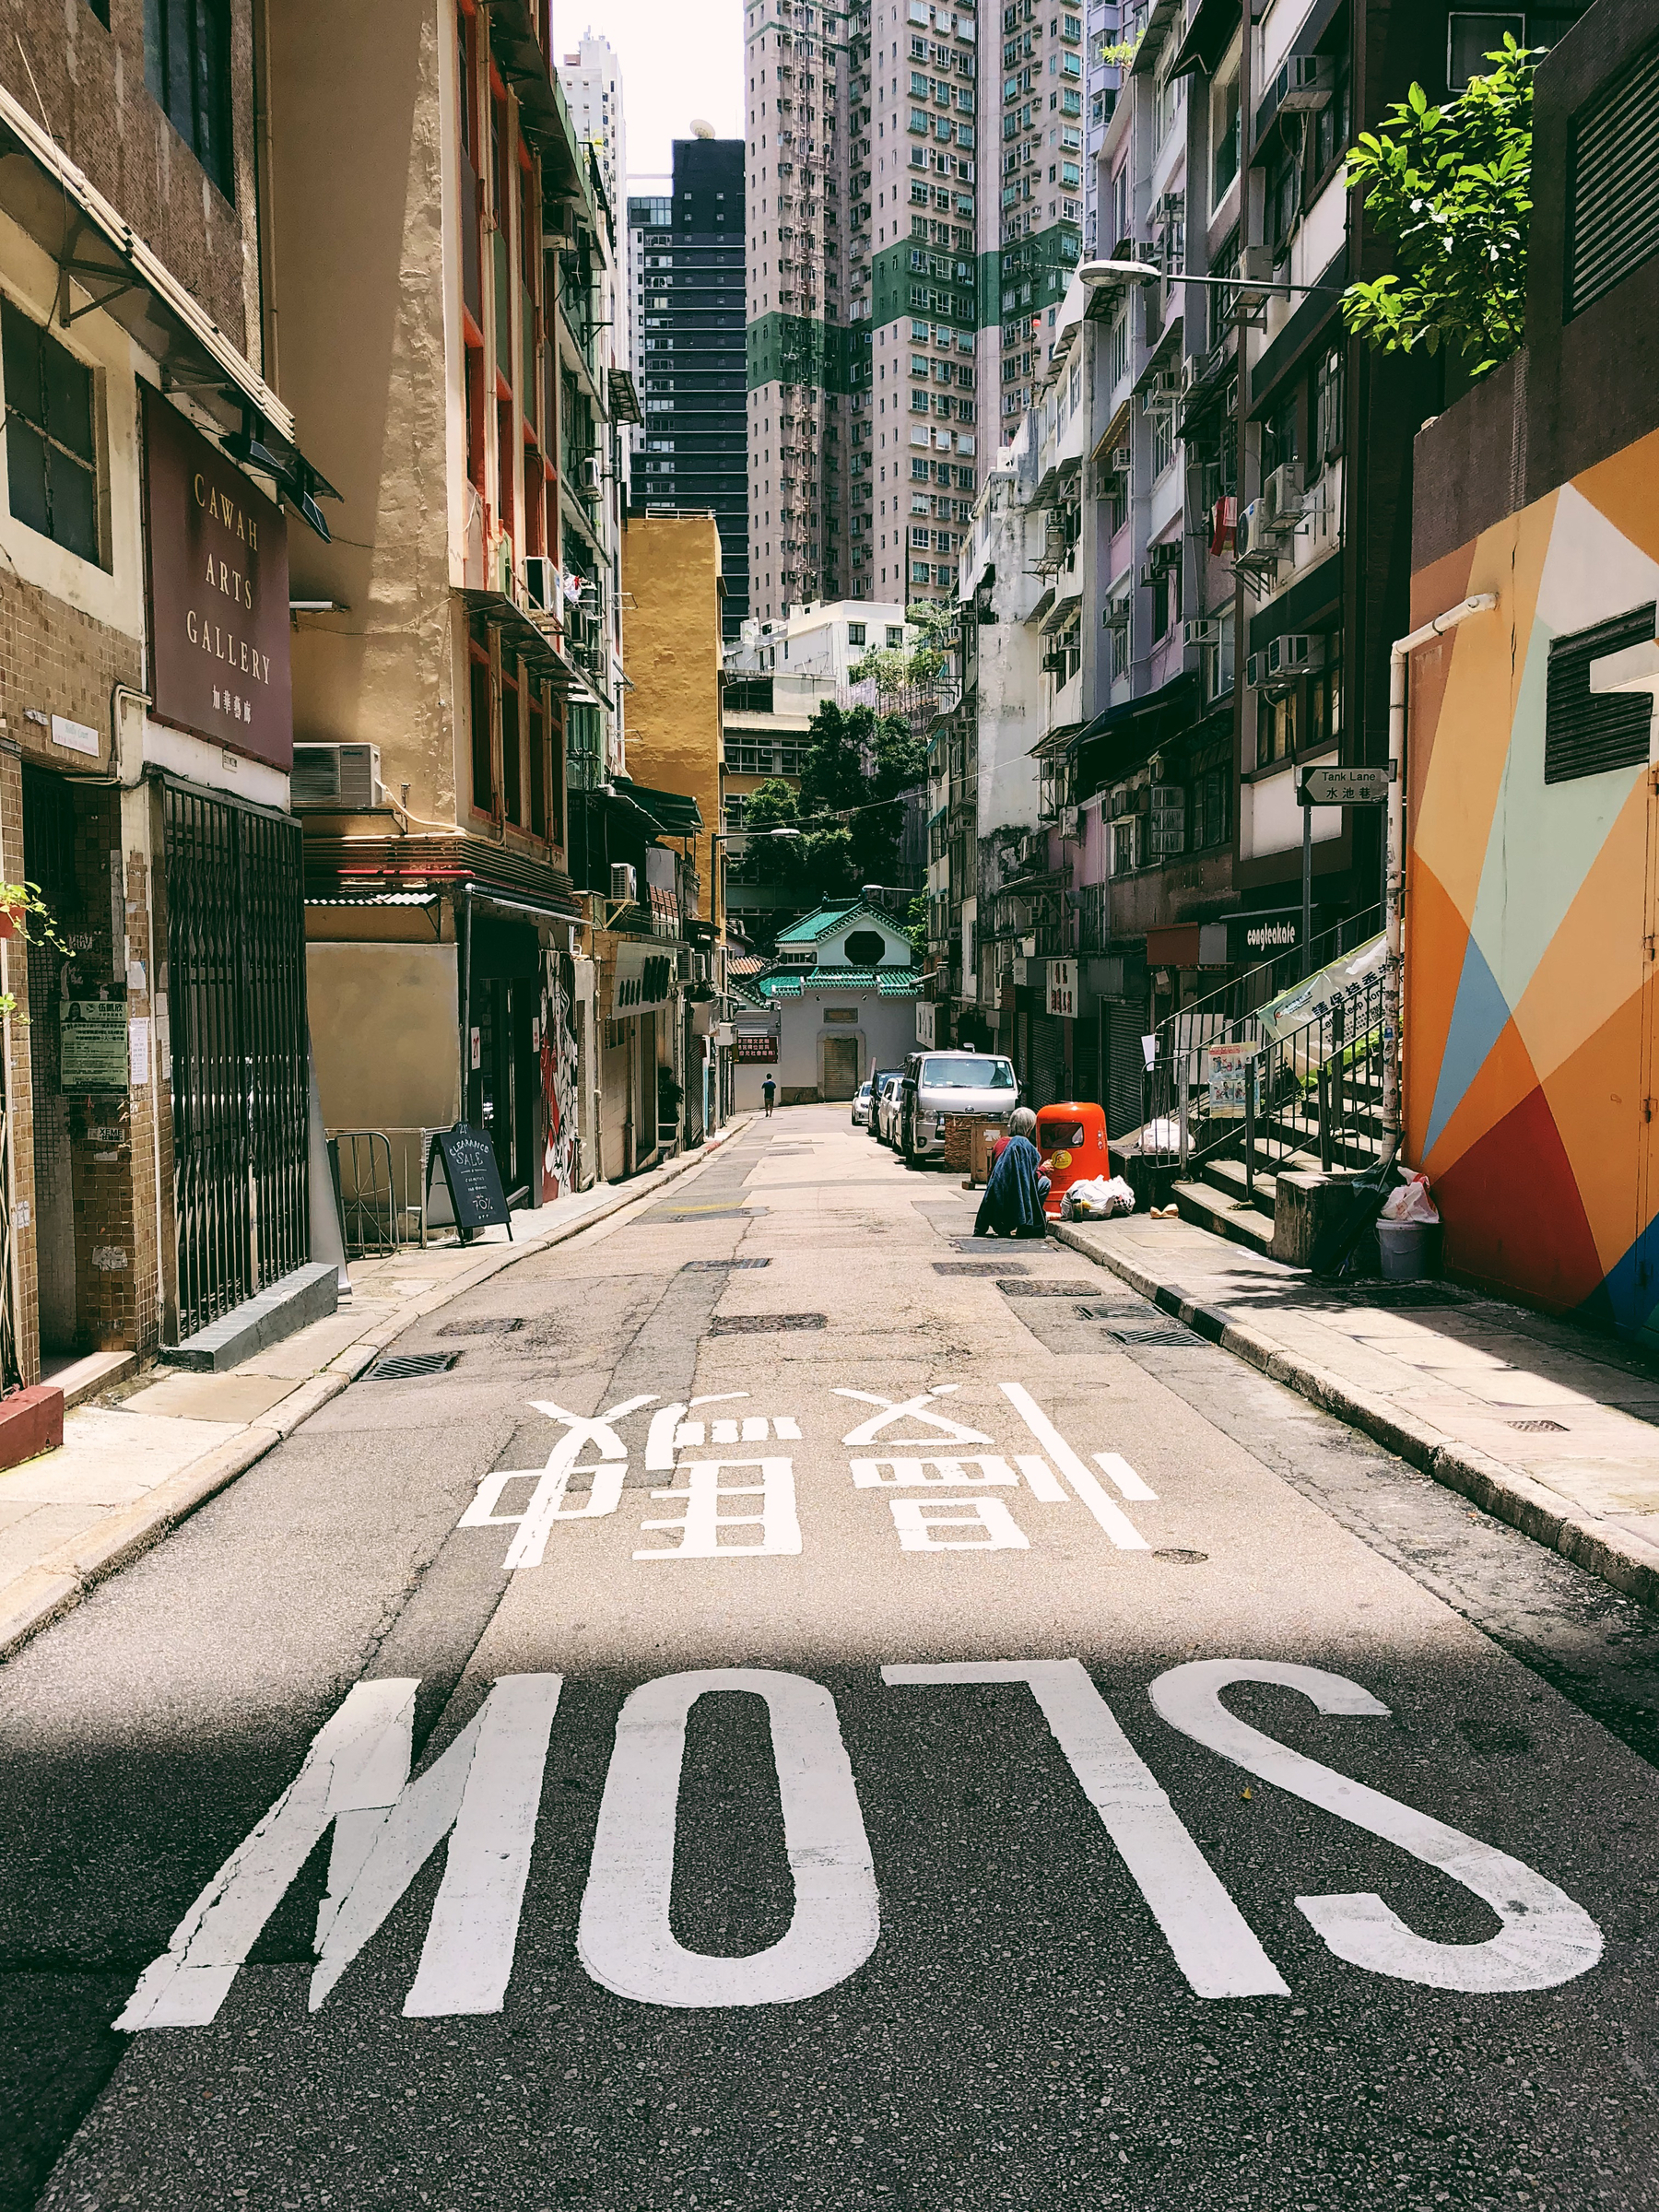 A street in Hong Kong, high rise buildings in the back, and “SLOW” written on the pavement. 